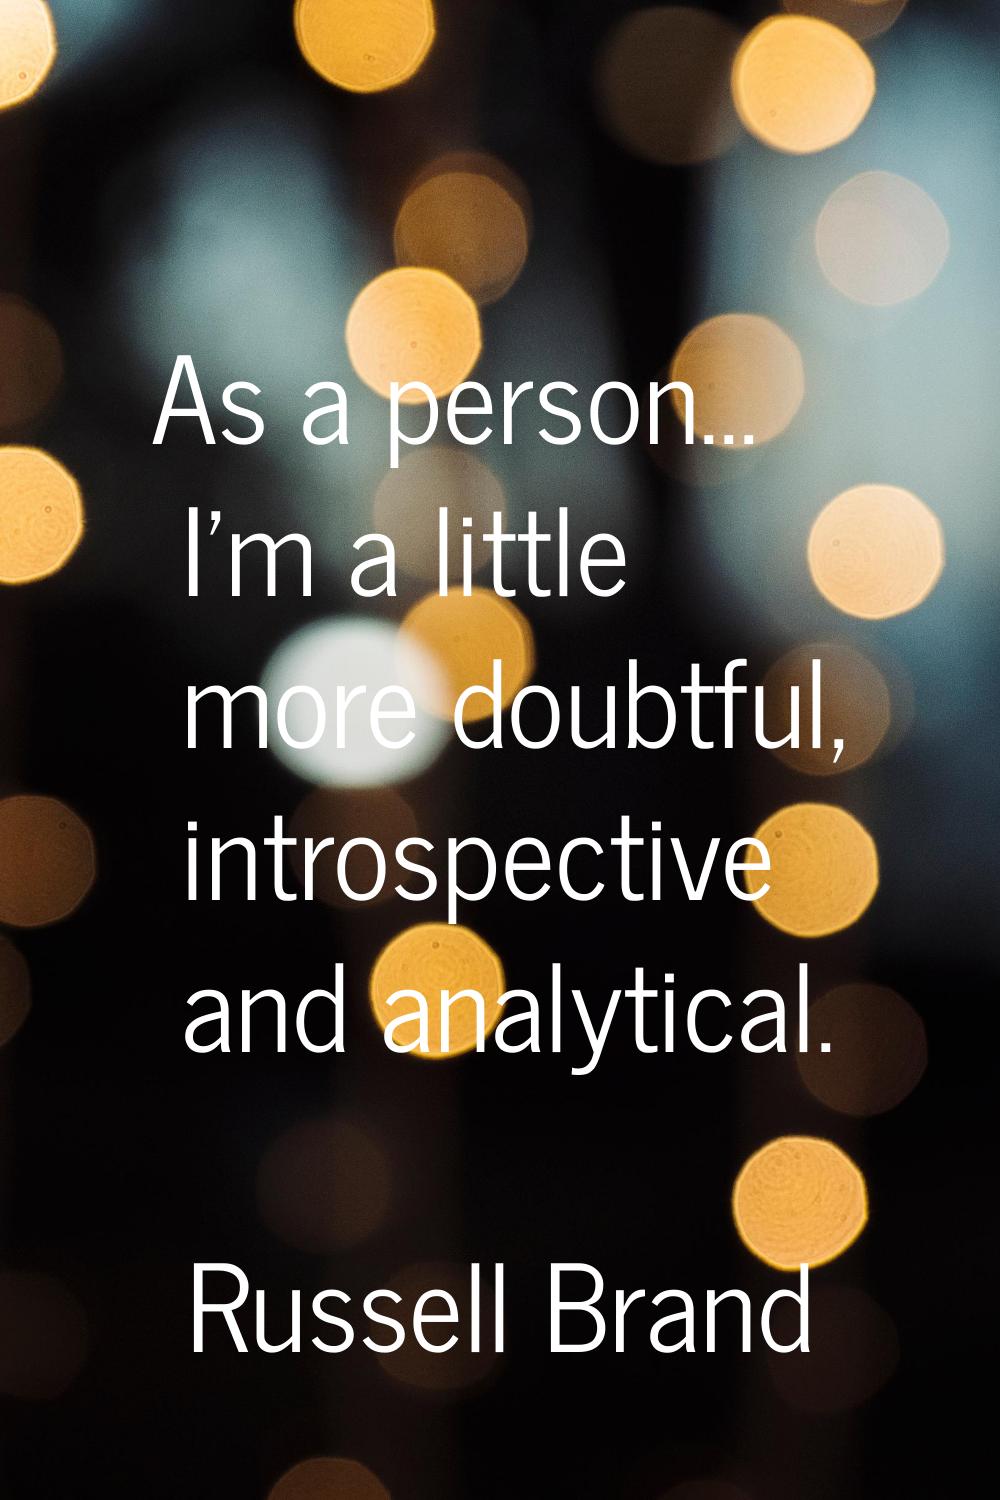 As a person... I'm a little more doubtful, introspective and analytical.